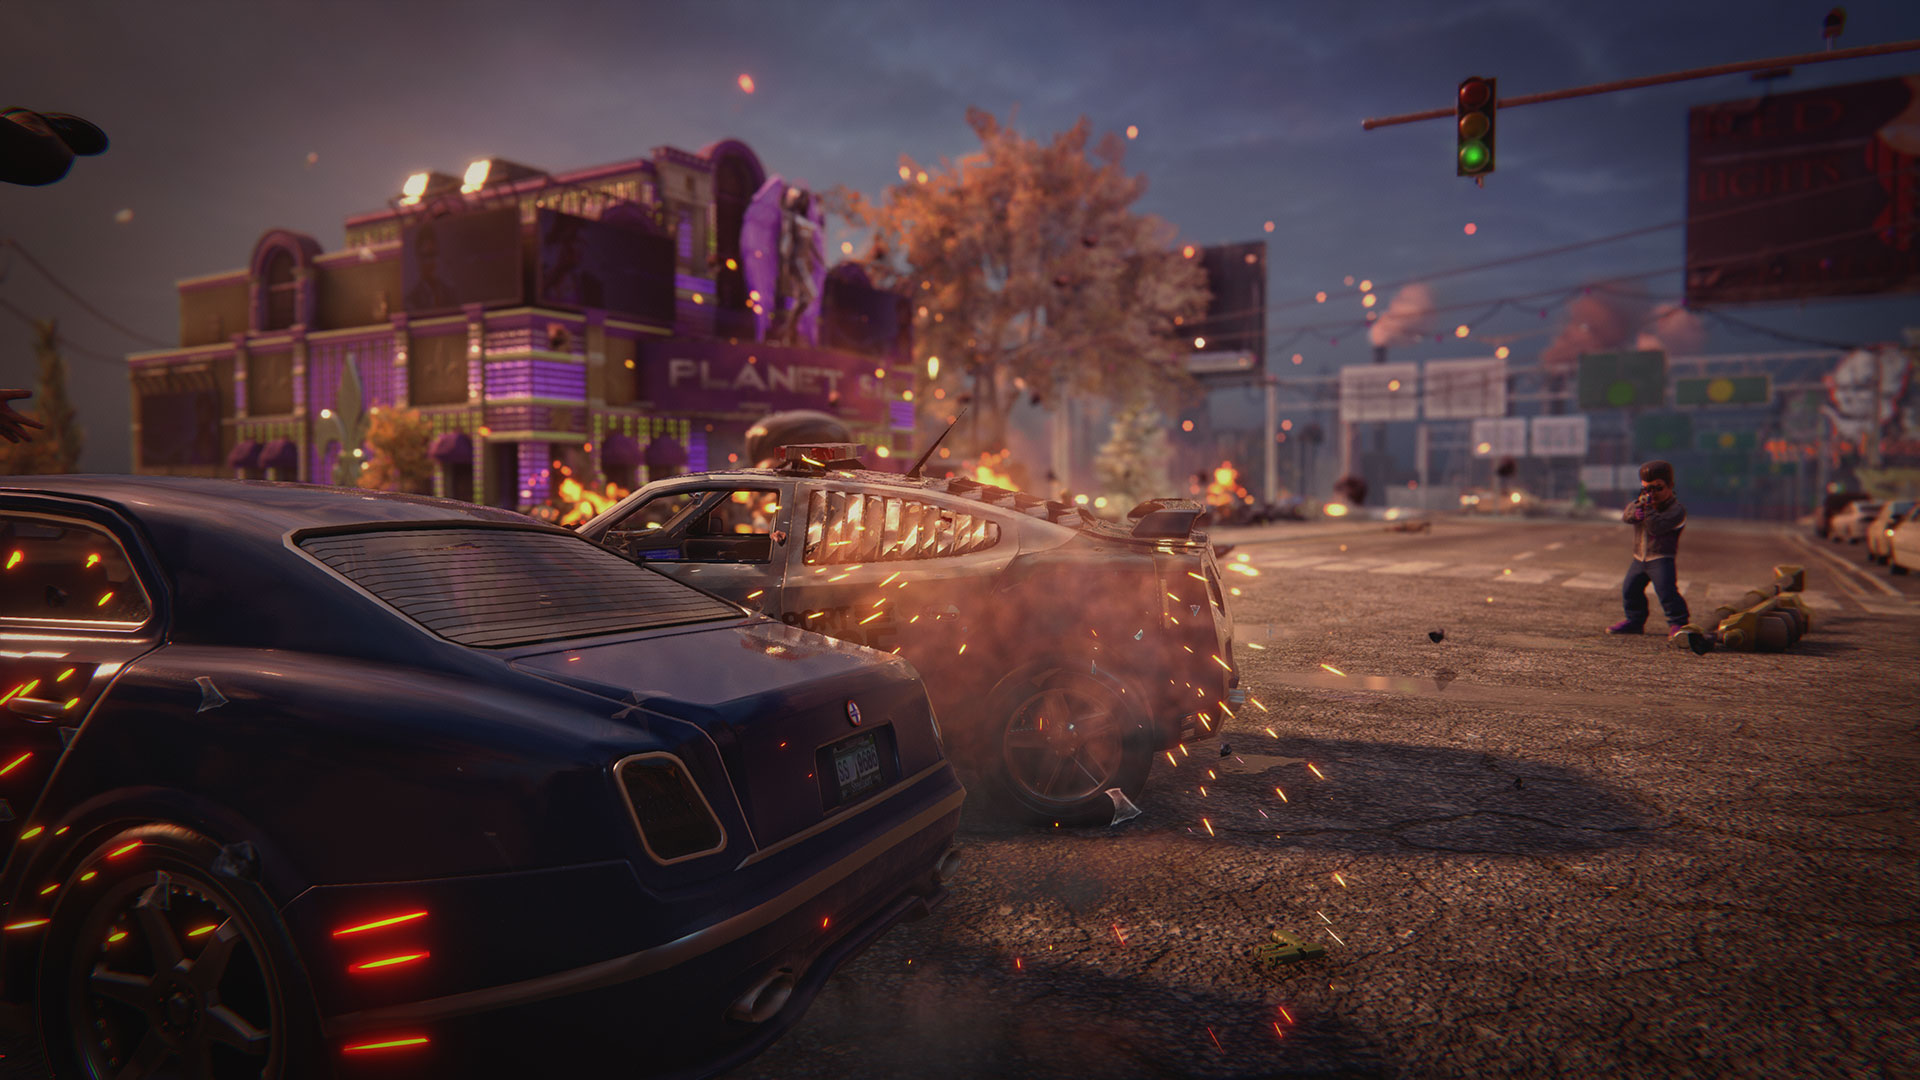 Saints Row The Third: Remastered review